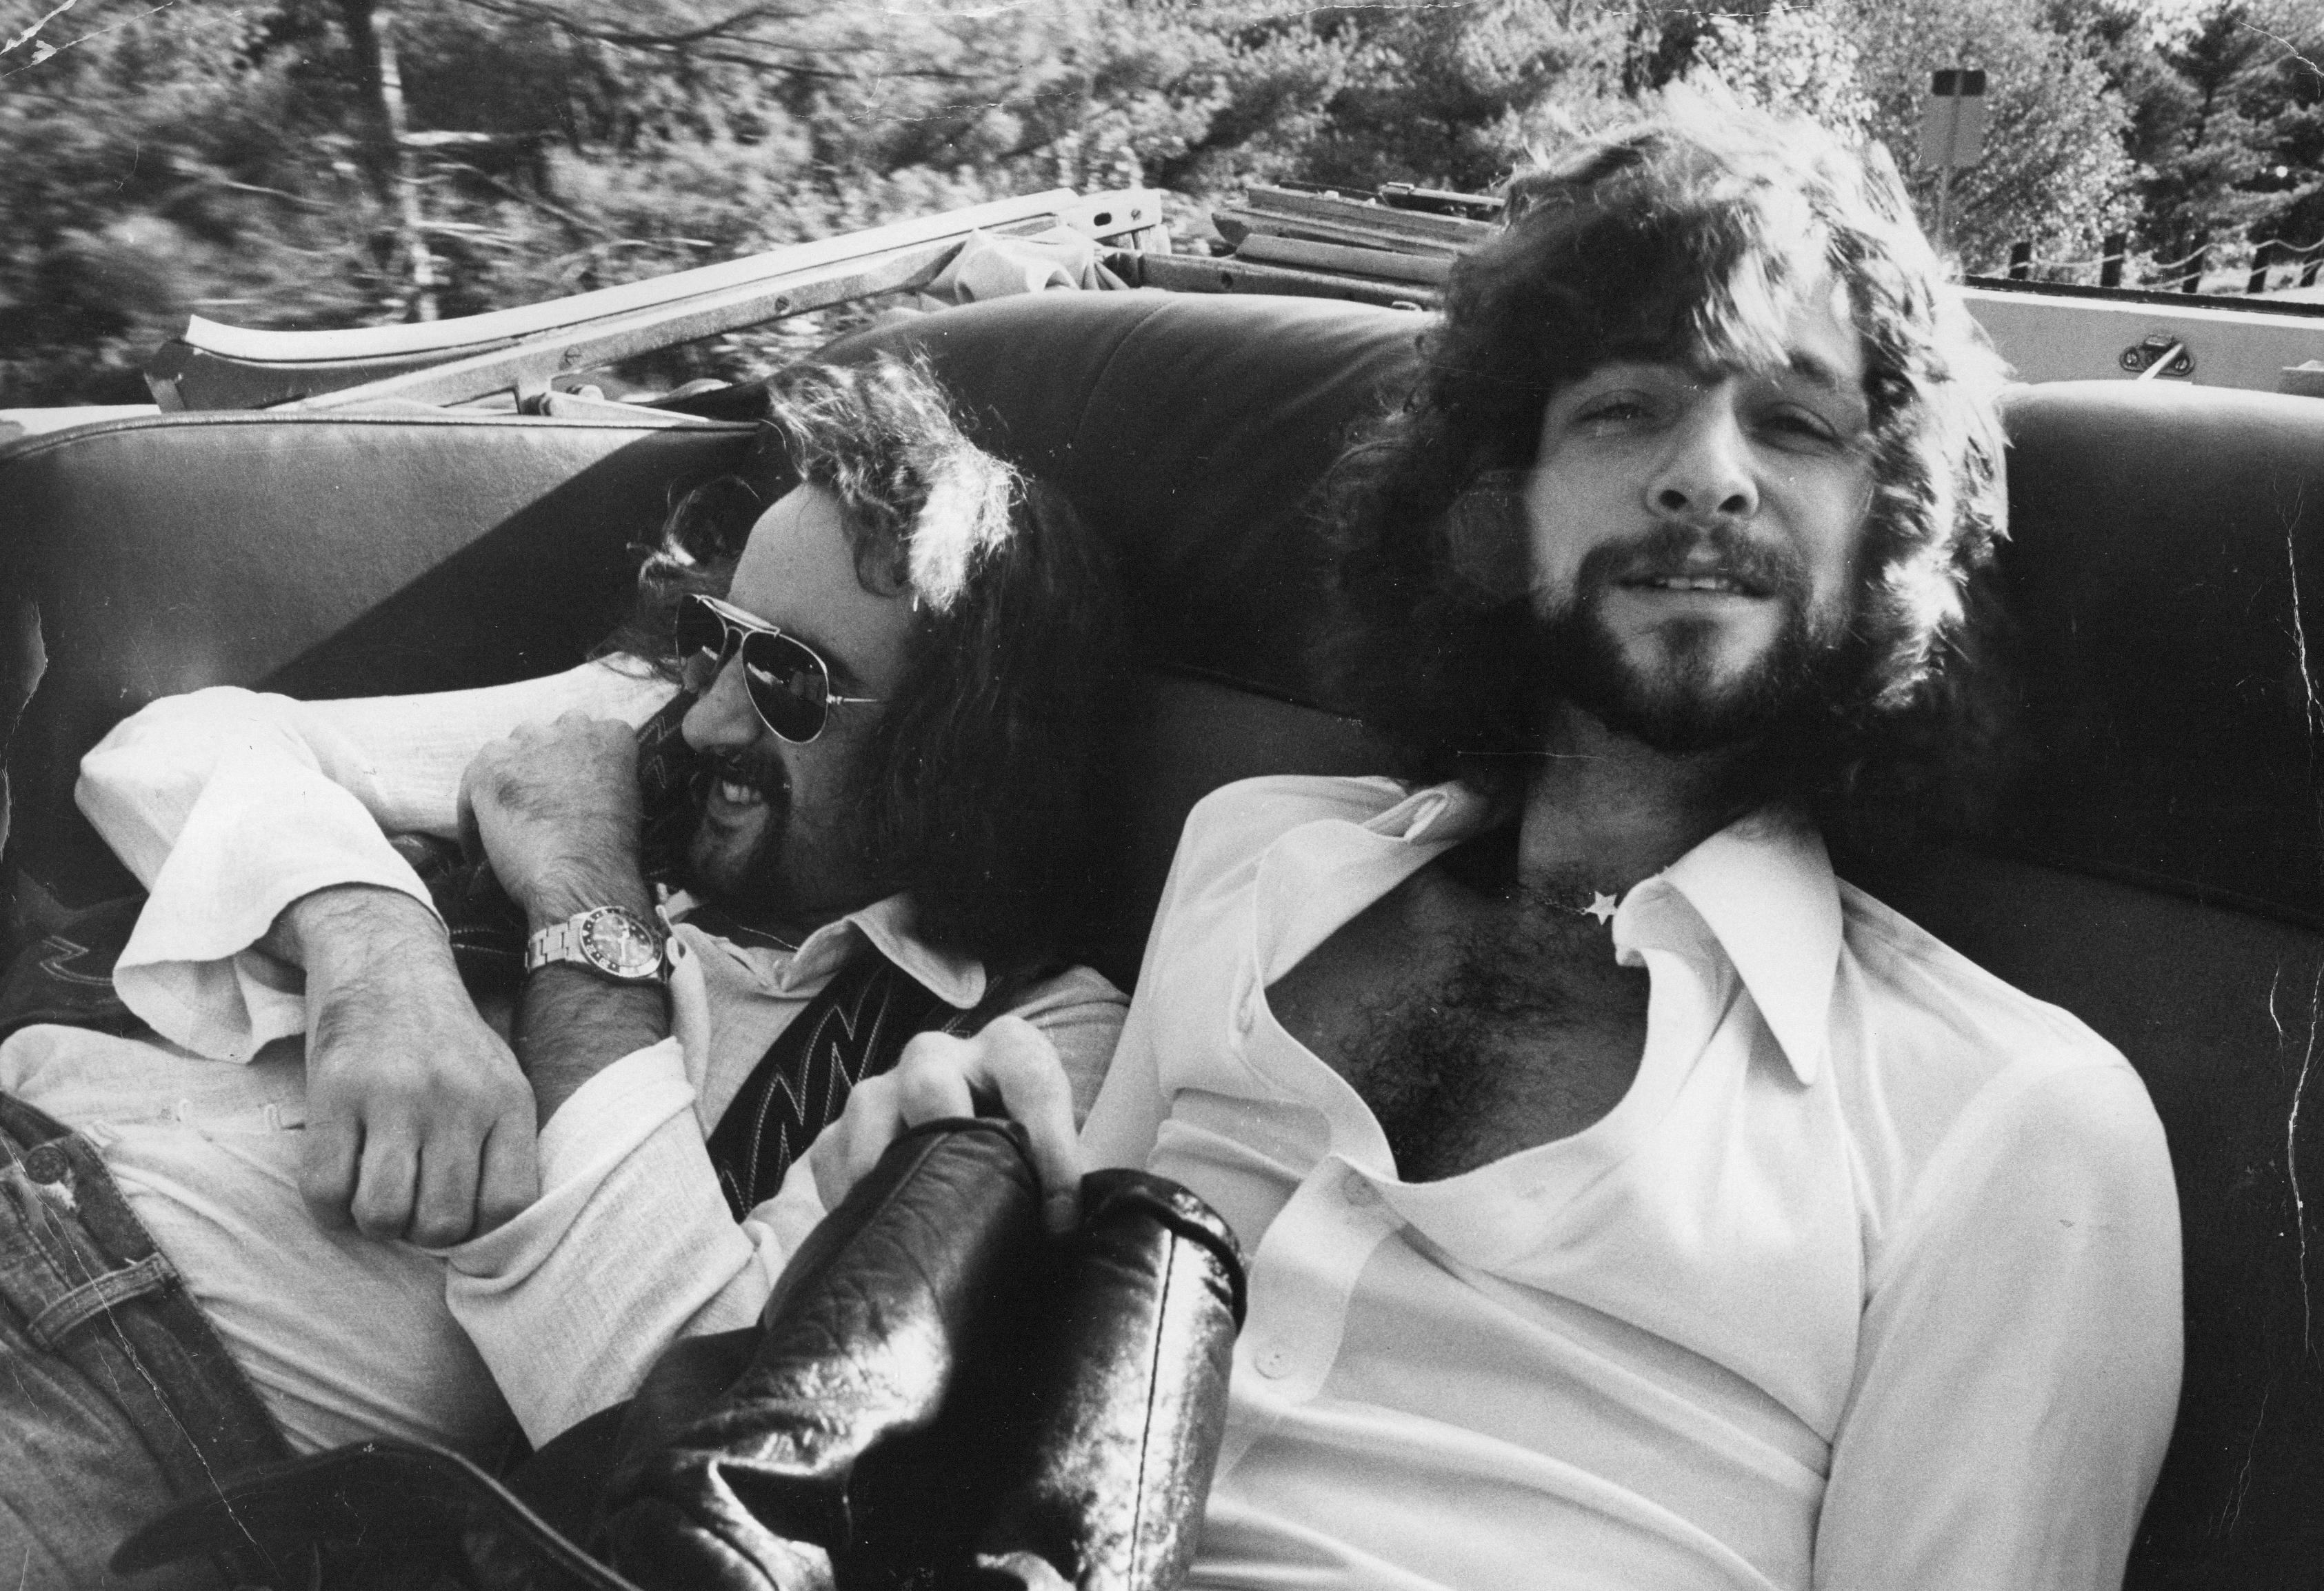 Fin Costello Black and White Photograph - John McVie and Bob Welch in Backseat Vintage Original Photograph